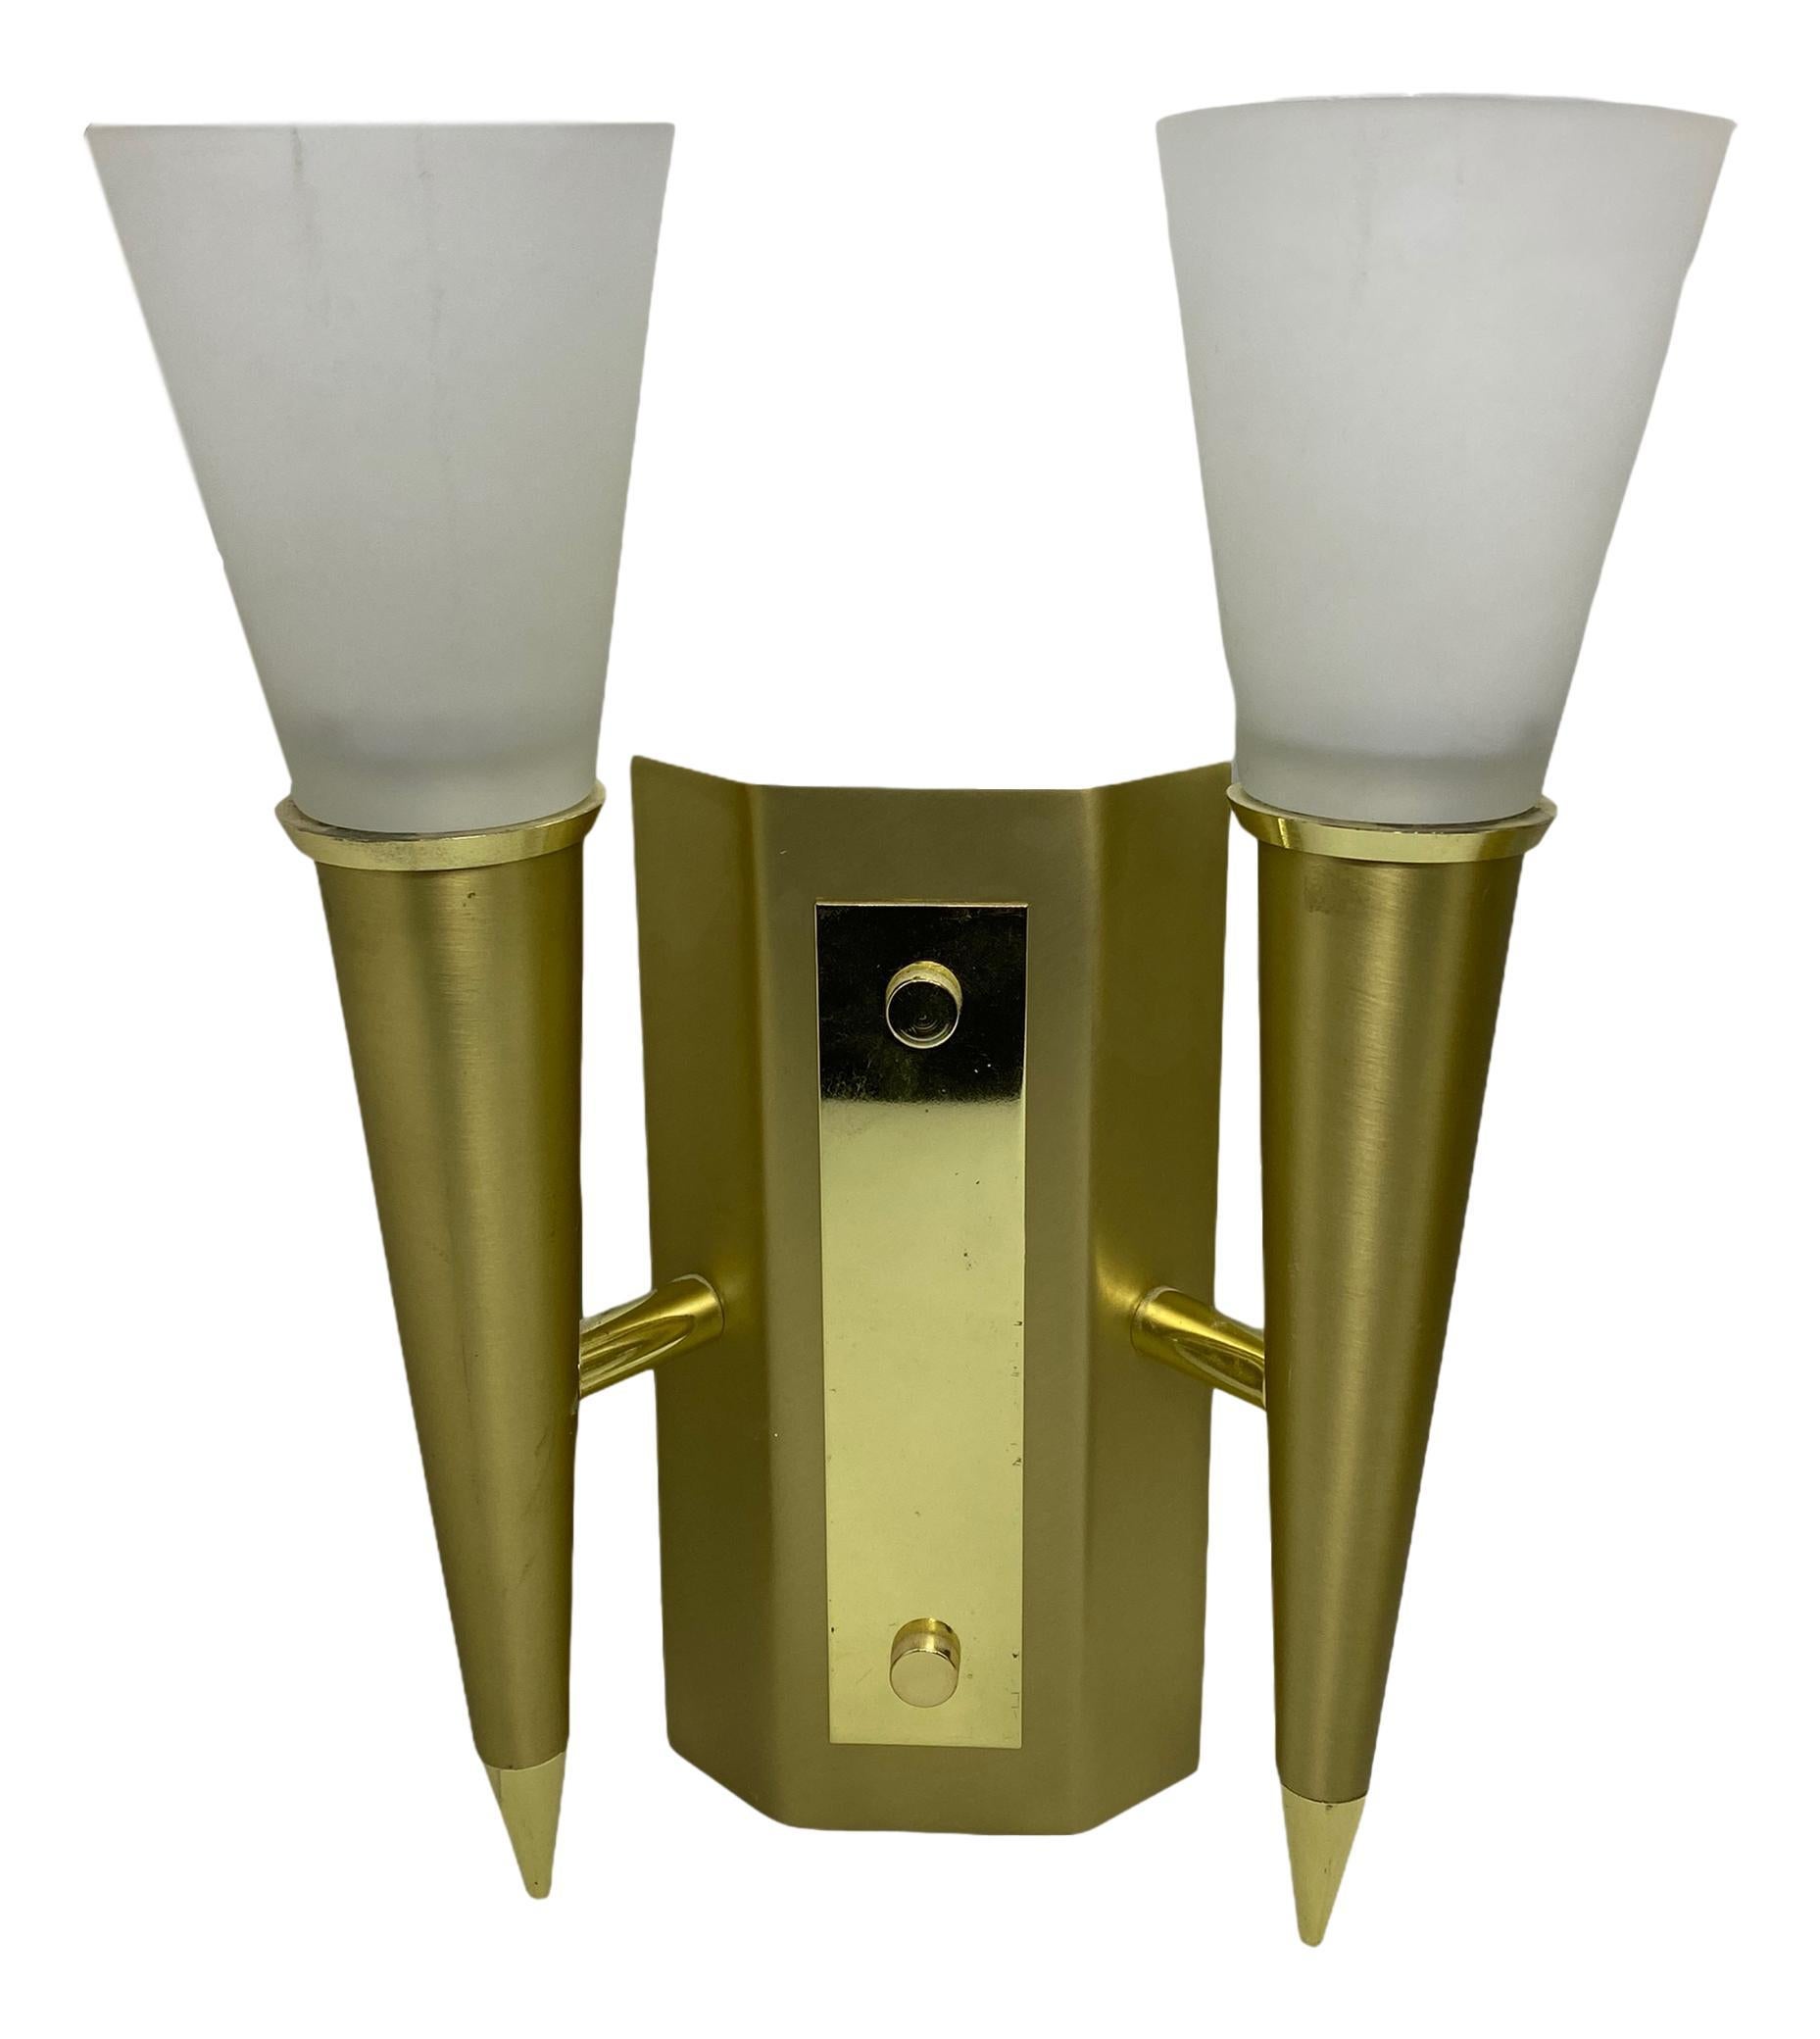 Pair of Art Deco style sconces in the shape of a torch. Each fixture requires two European E14 candelabras bulbs, each bulb up to 40 watts. The wall lights have a beautiful patina and gives each room an eclectic statement. Made of brass and satin